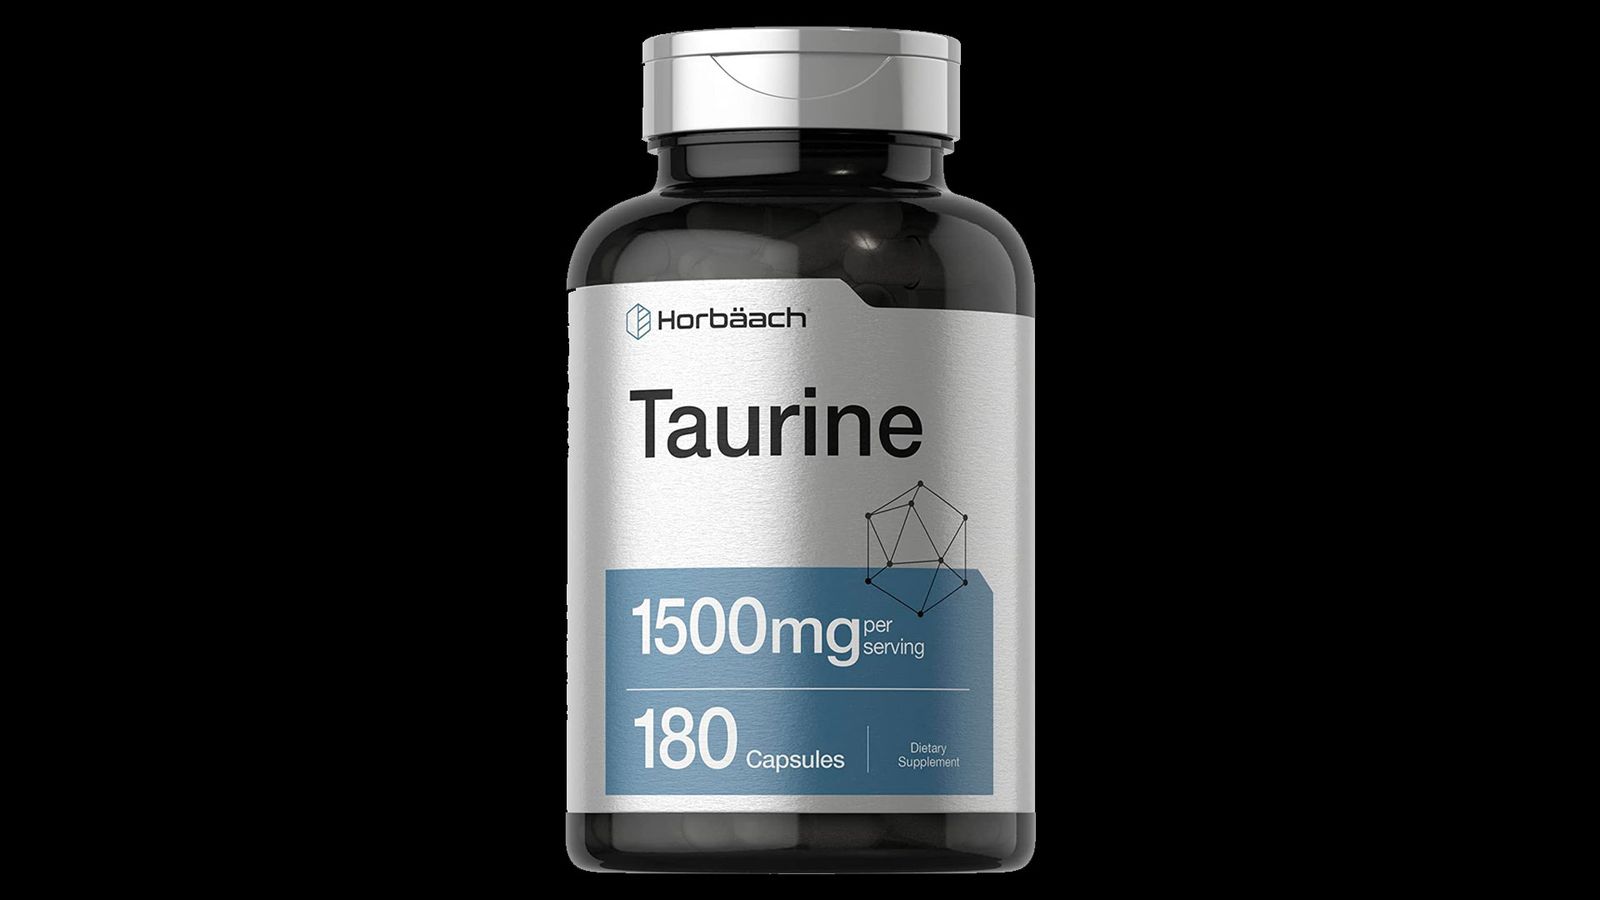 Horbäach Taurine Capsules product image of a black container with silver and light blue branding.